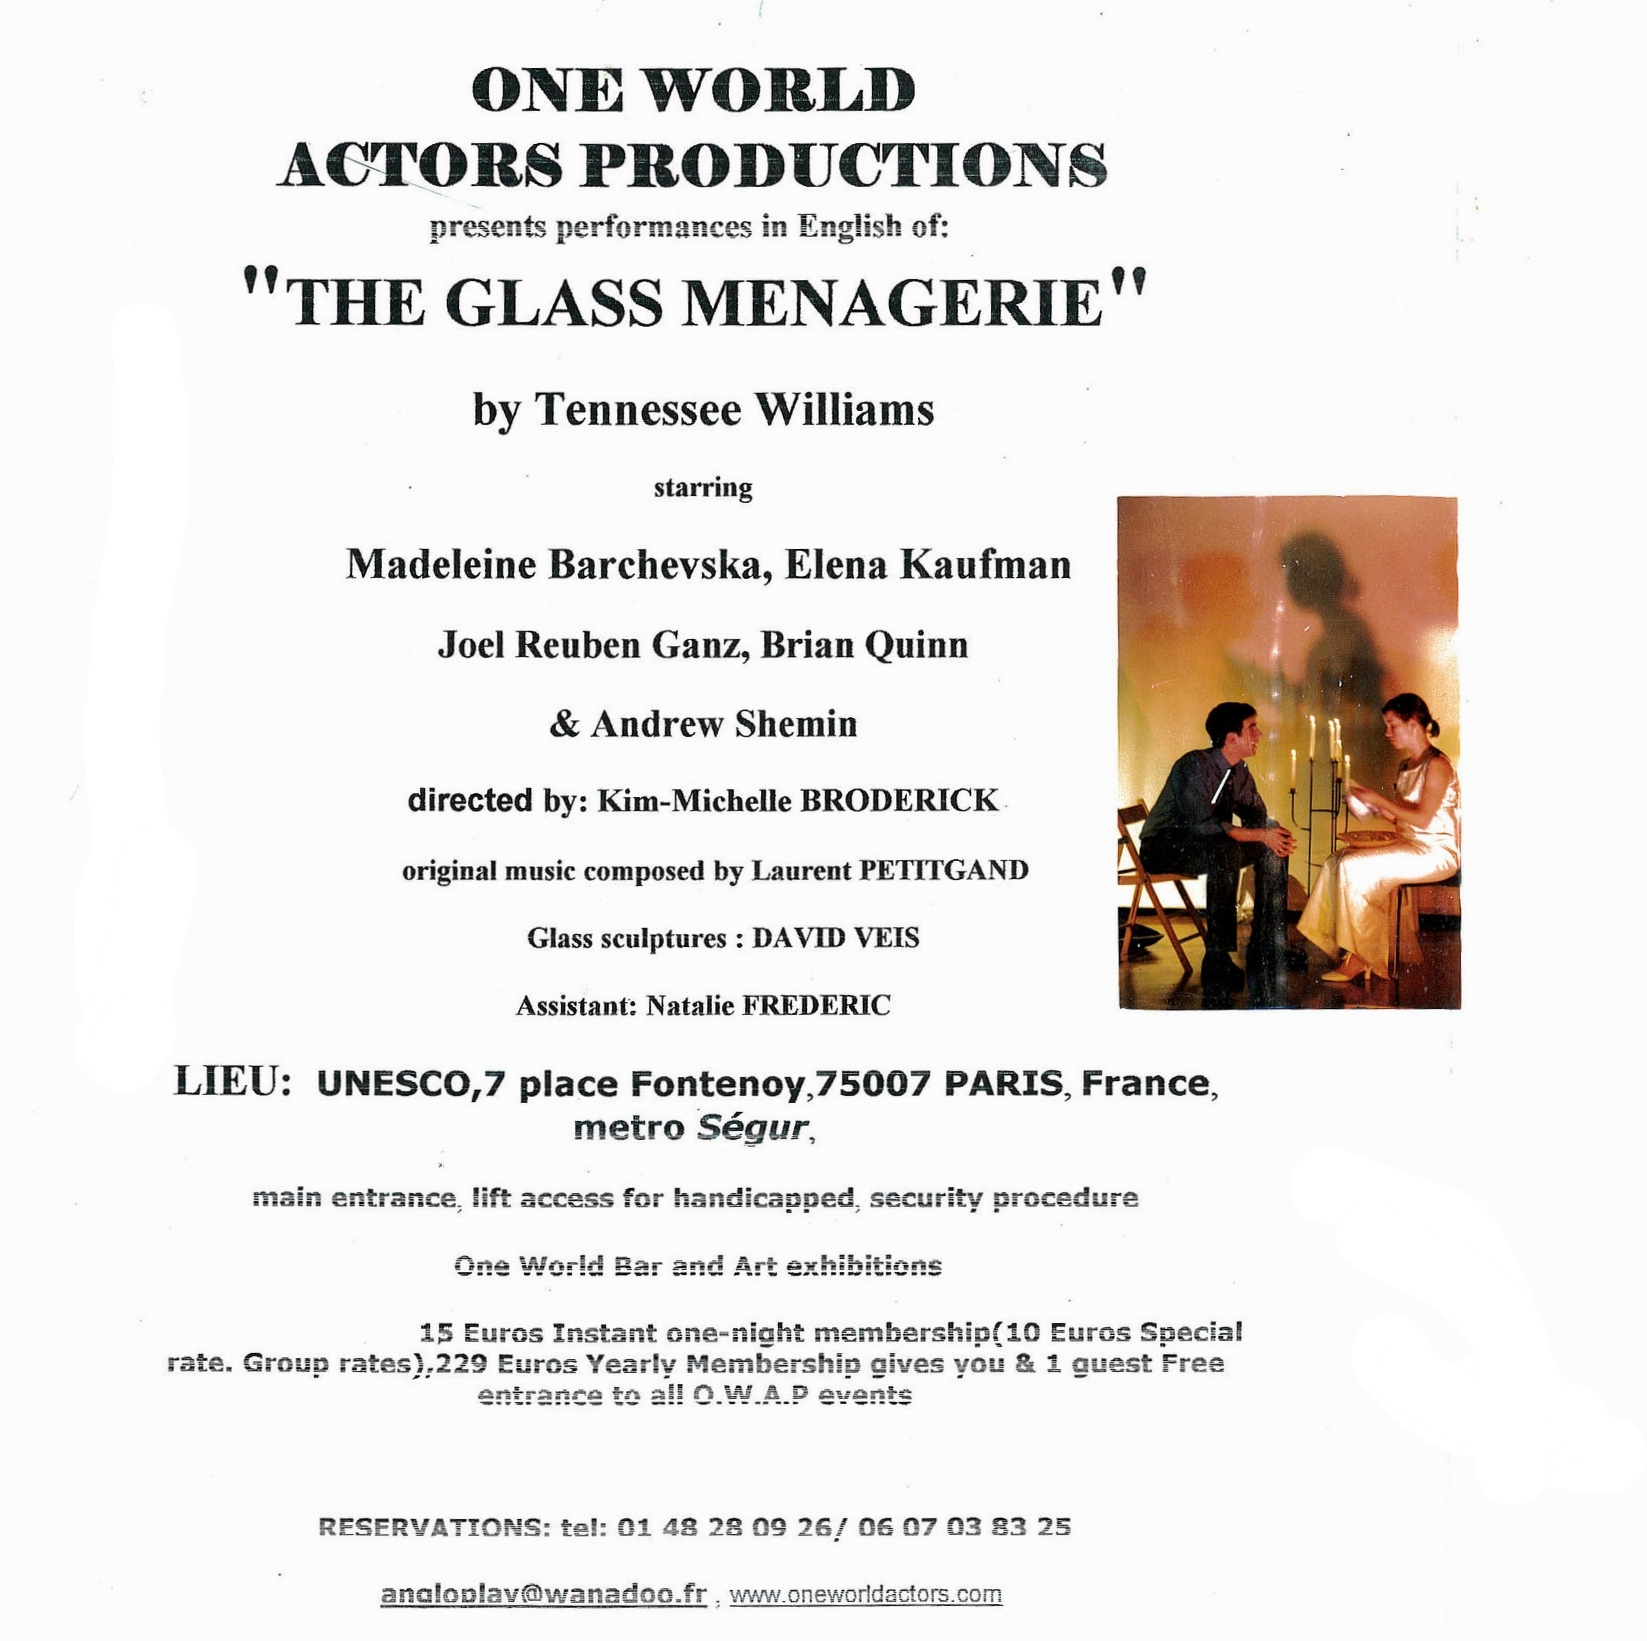 Oe World Actors Productions creation of THE GLASS MENAGERIE by Tennessee Williams UNESCO Paris France.jpg